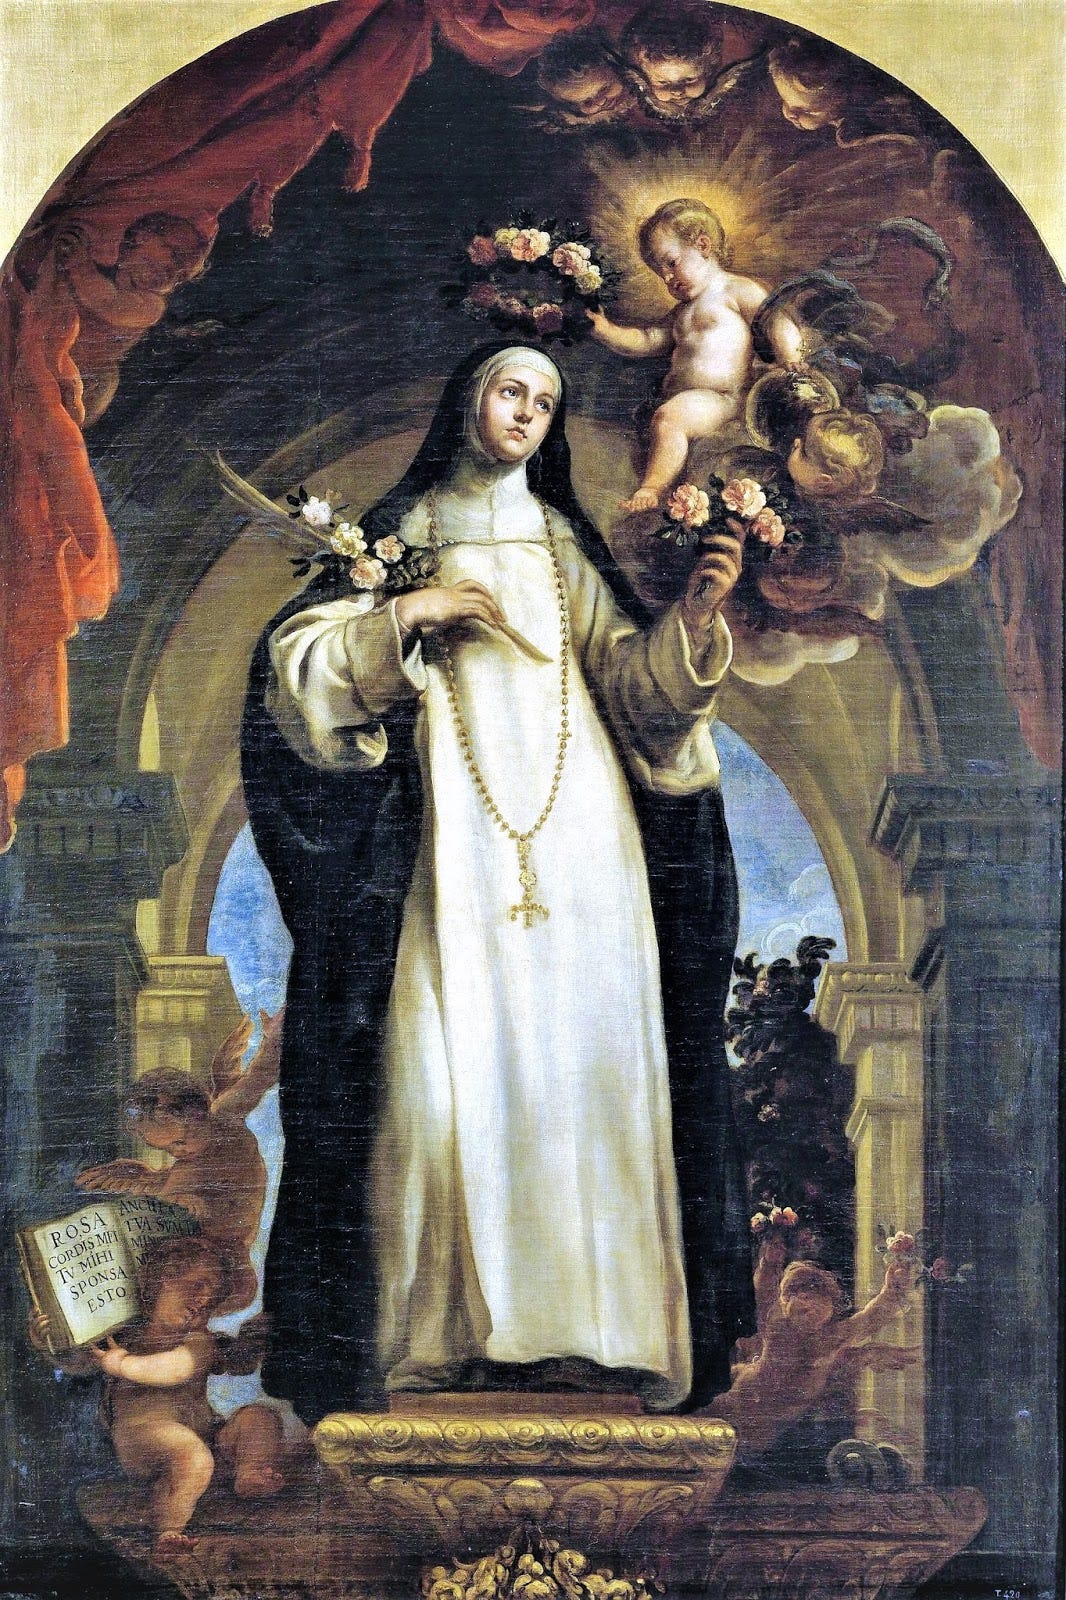 Ad Imaginem Dei: Saint Rose of Lima, The First Saint of the Americas